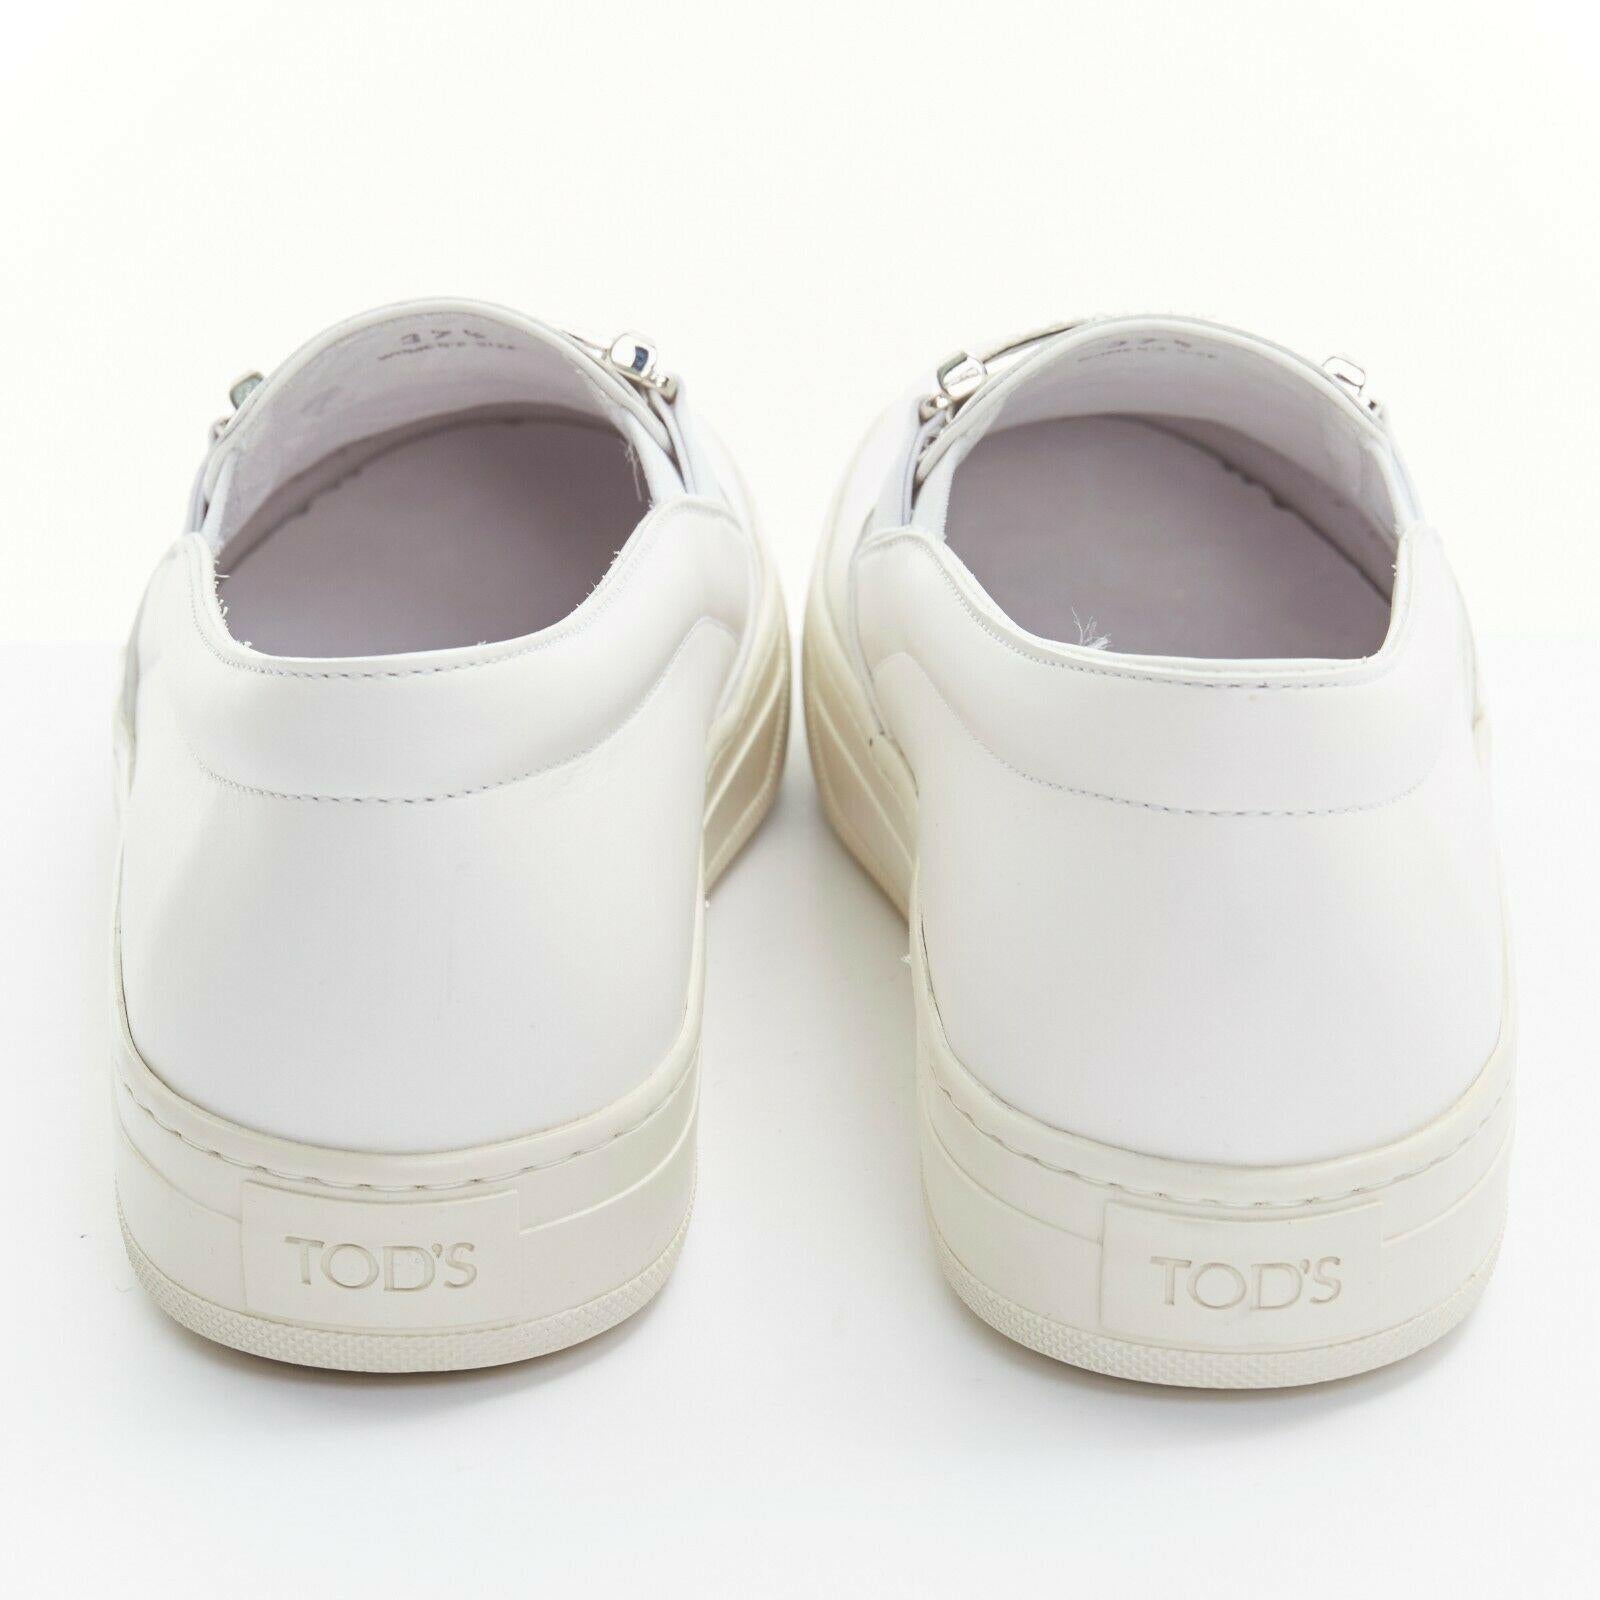 new TOD'S white leather crystal paved buckle round toe sneaker skate shoe EU37.5 1